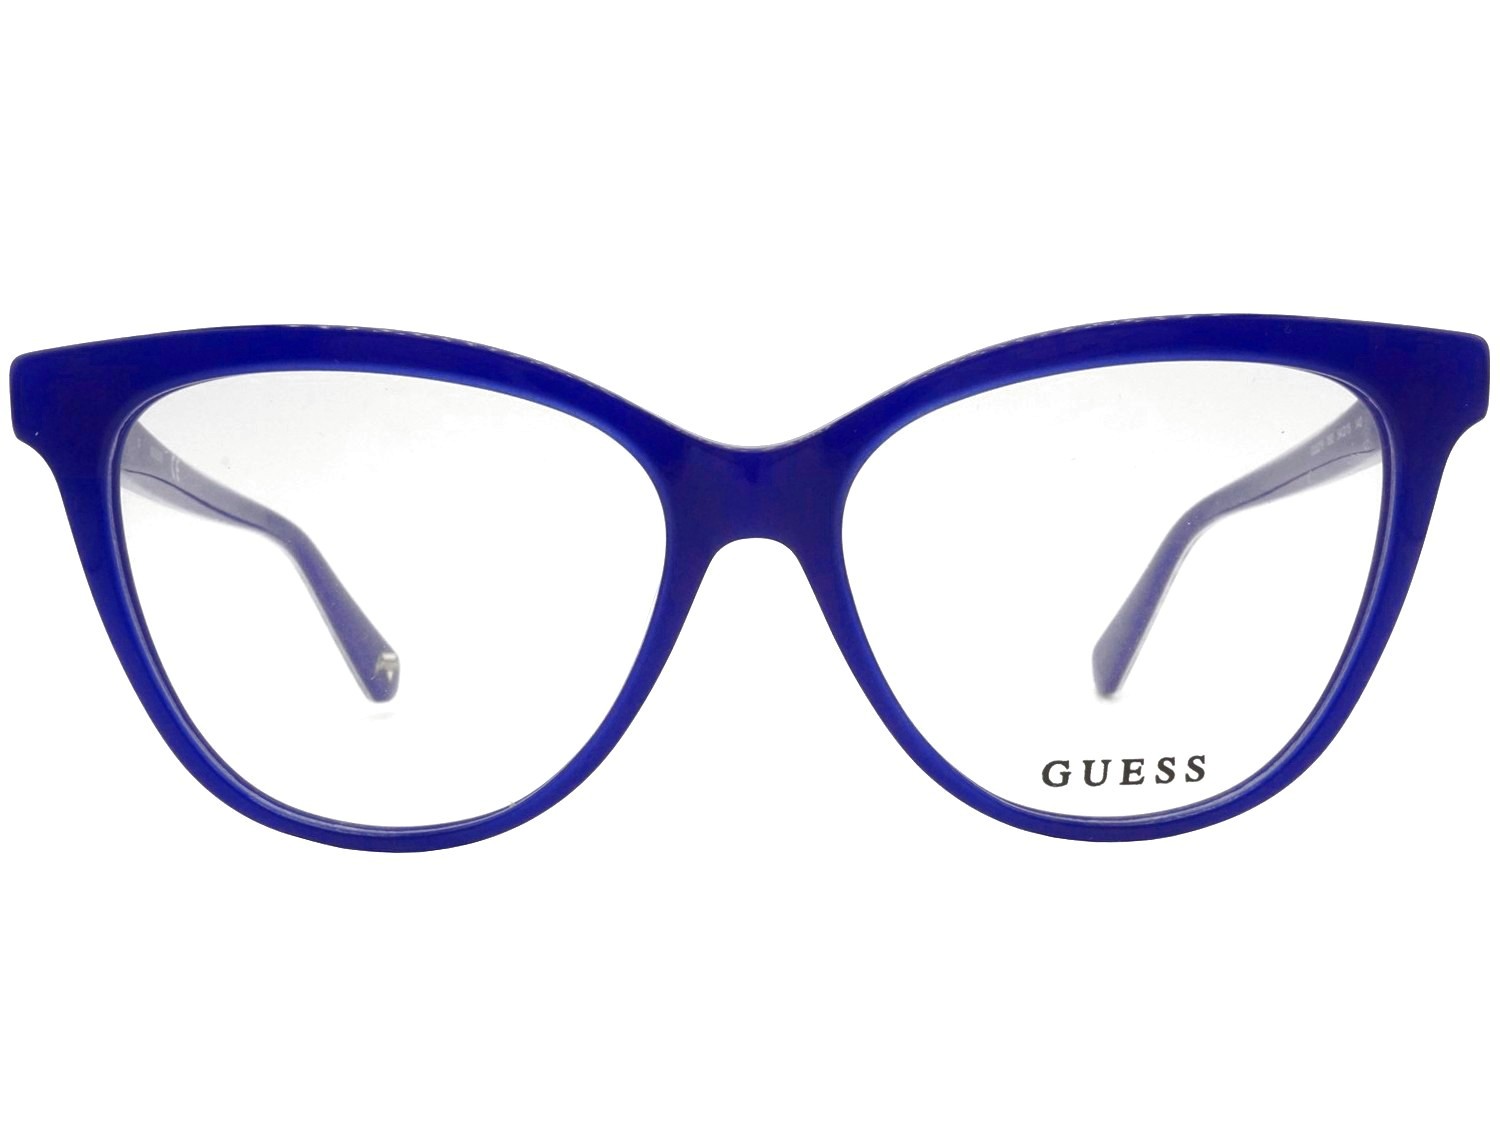 Guess 5219 092